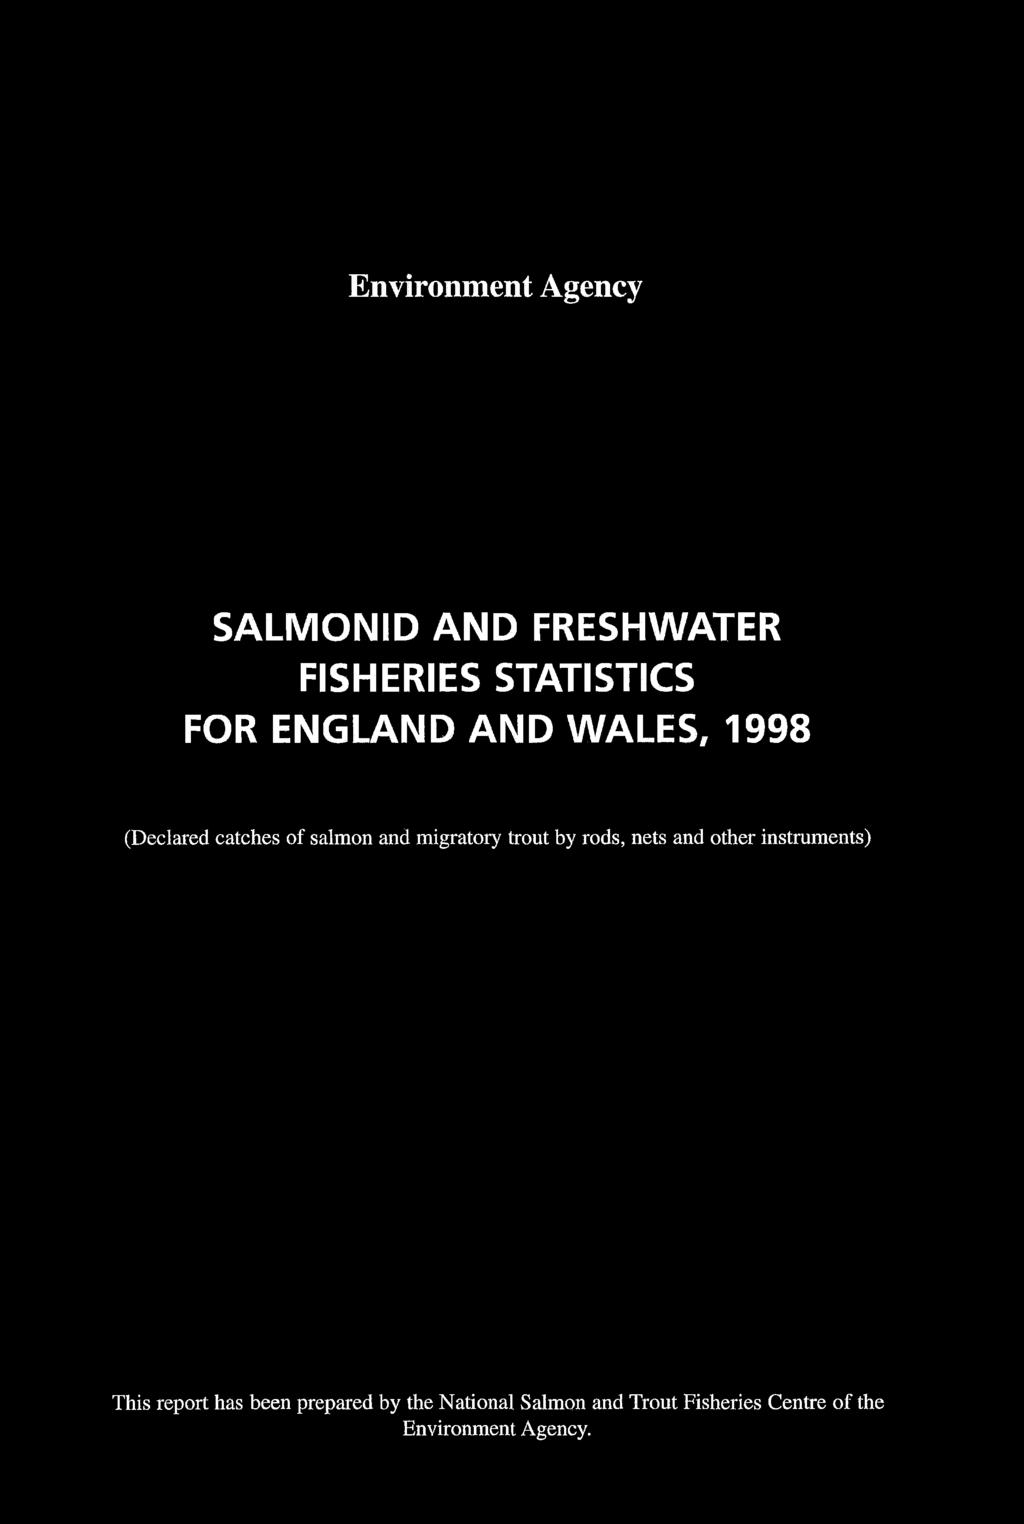 Environment Agency SALMONID AND FRESHWATER FISHERIES STATISTICS FOR ENGLAND AND WALES, 1998 (Declared catches of salmon and migratory trout